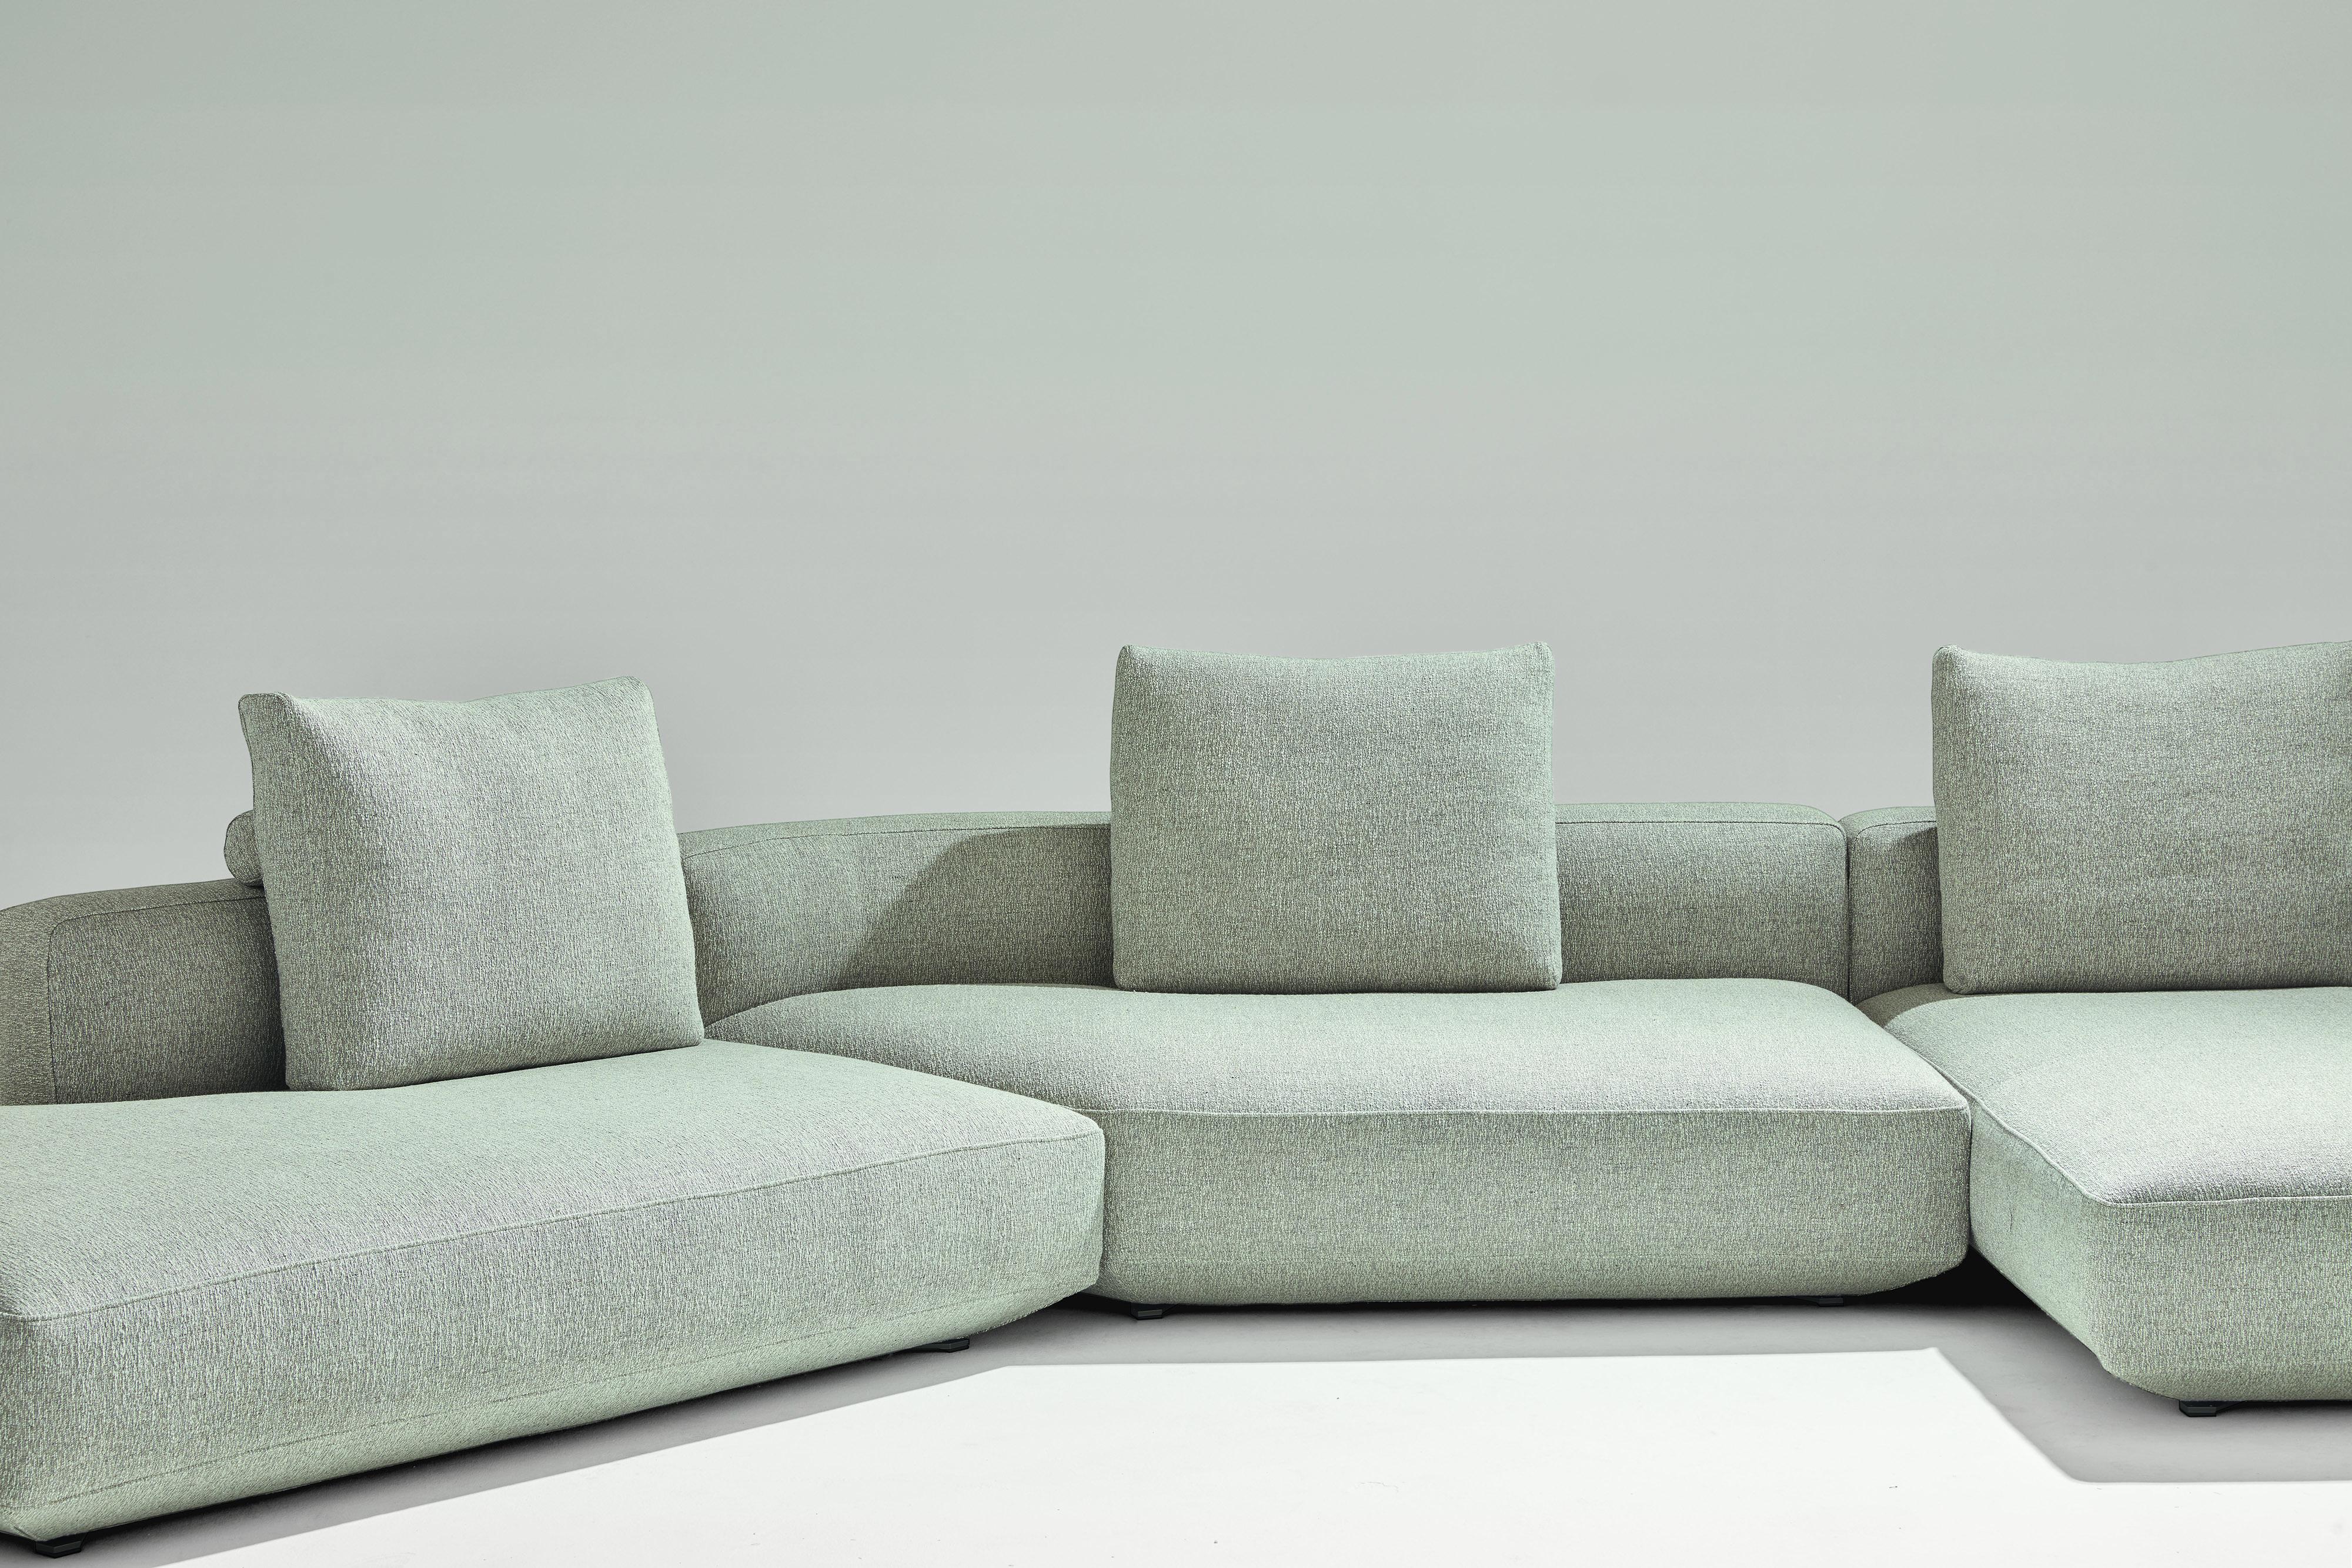 Zanotta Pianoalto Modular Sofa in Trama Fabric by Ludovica & Roberto Palomba

The range of modular or monobloc sofas allows many corner or straight compositions. 

Back cushions upholstered in polyurethane/ Dacron Du Pont or in 100% pure goose